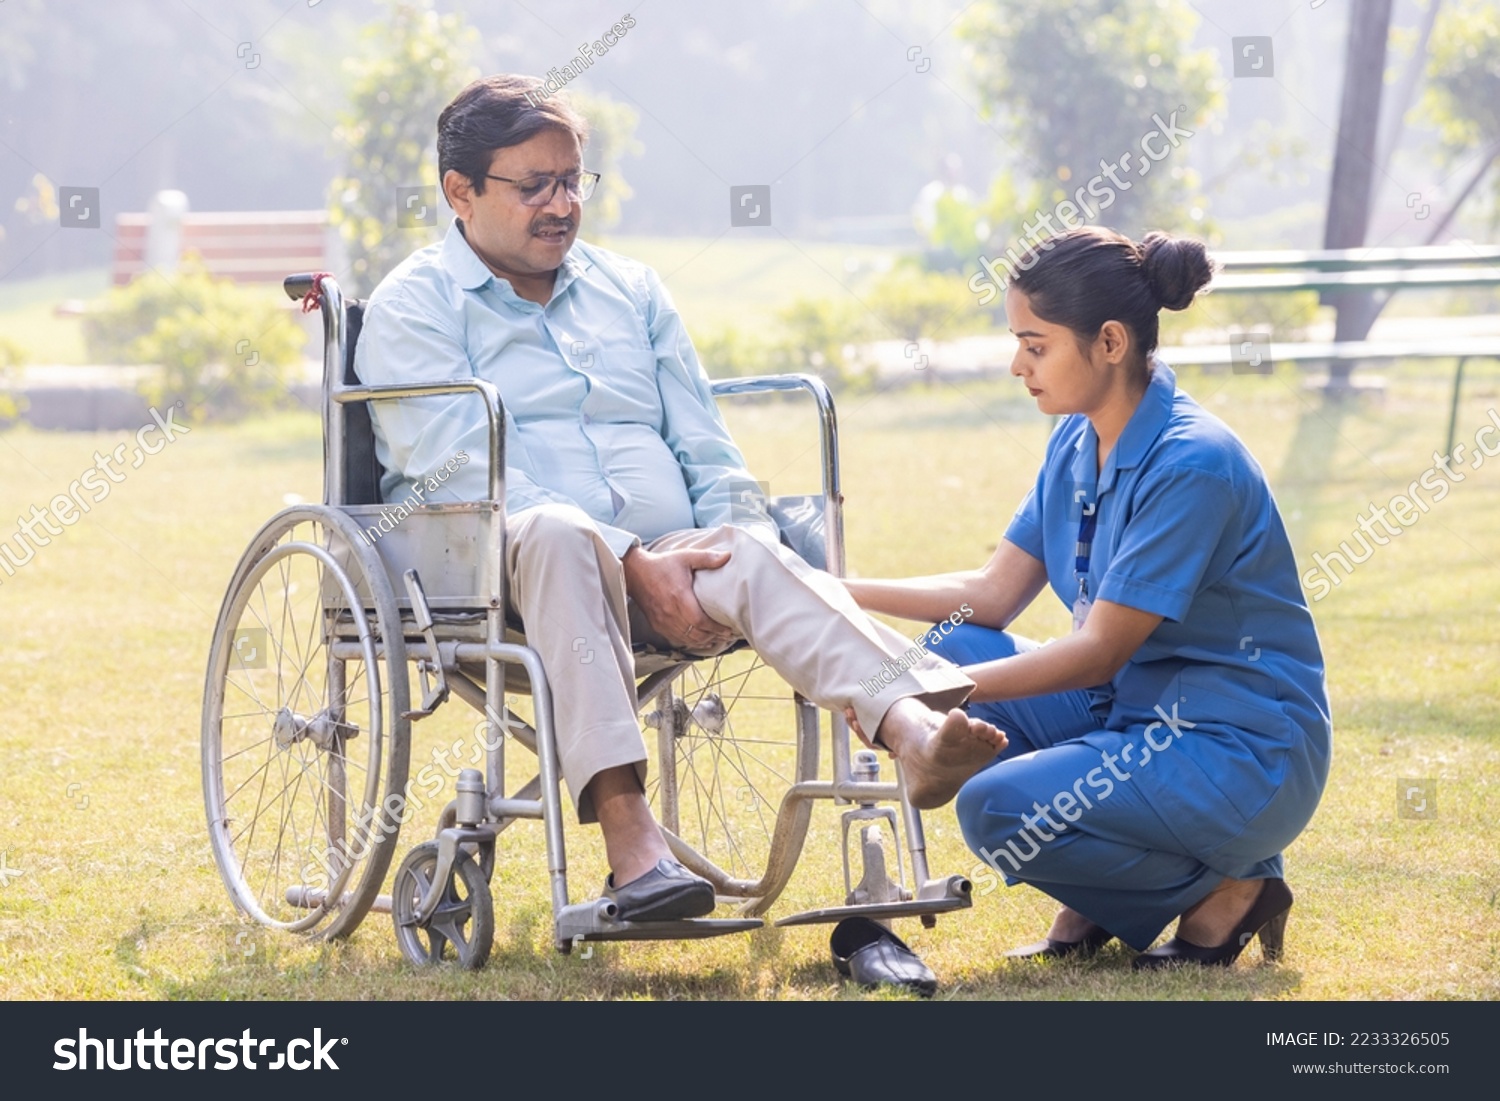 Female caregiver helping senior man in wheelchair to lift lag at park. #2233326505